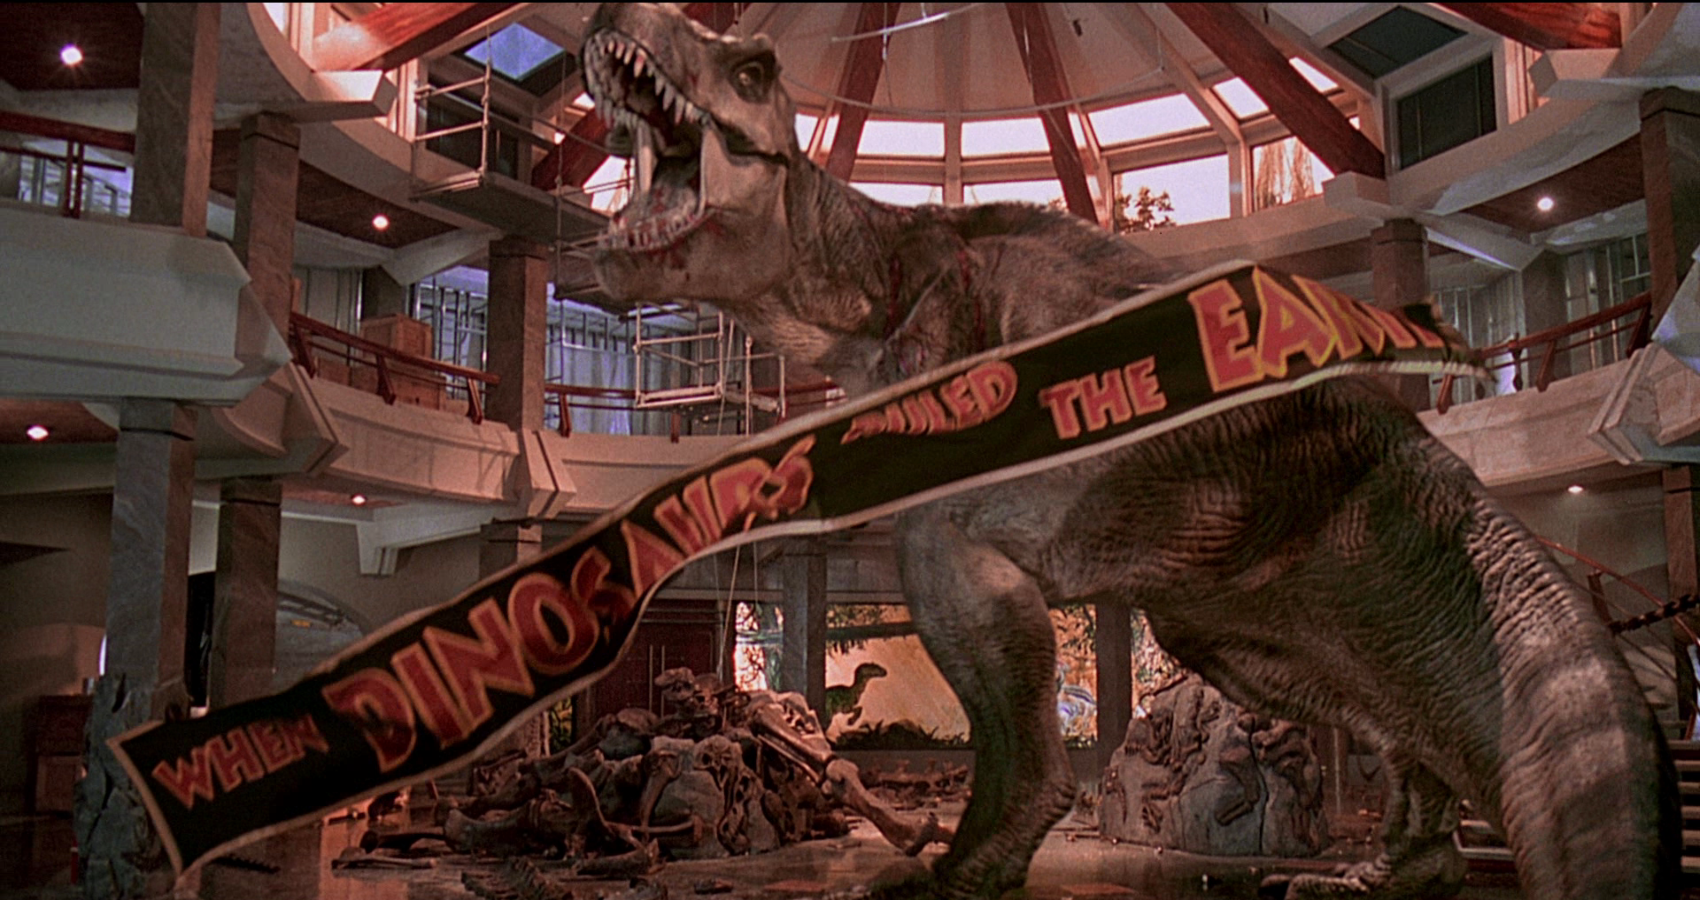 The sign is located in front of the T Rex